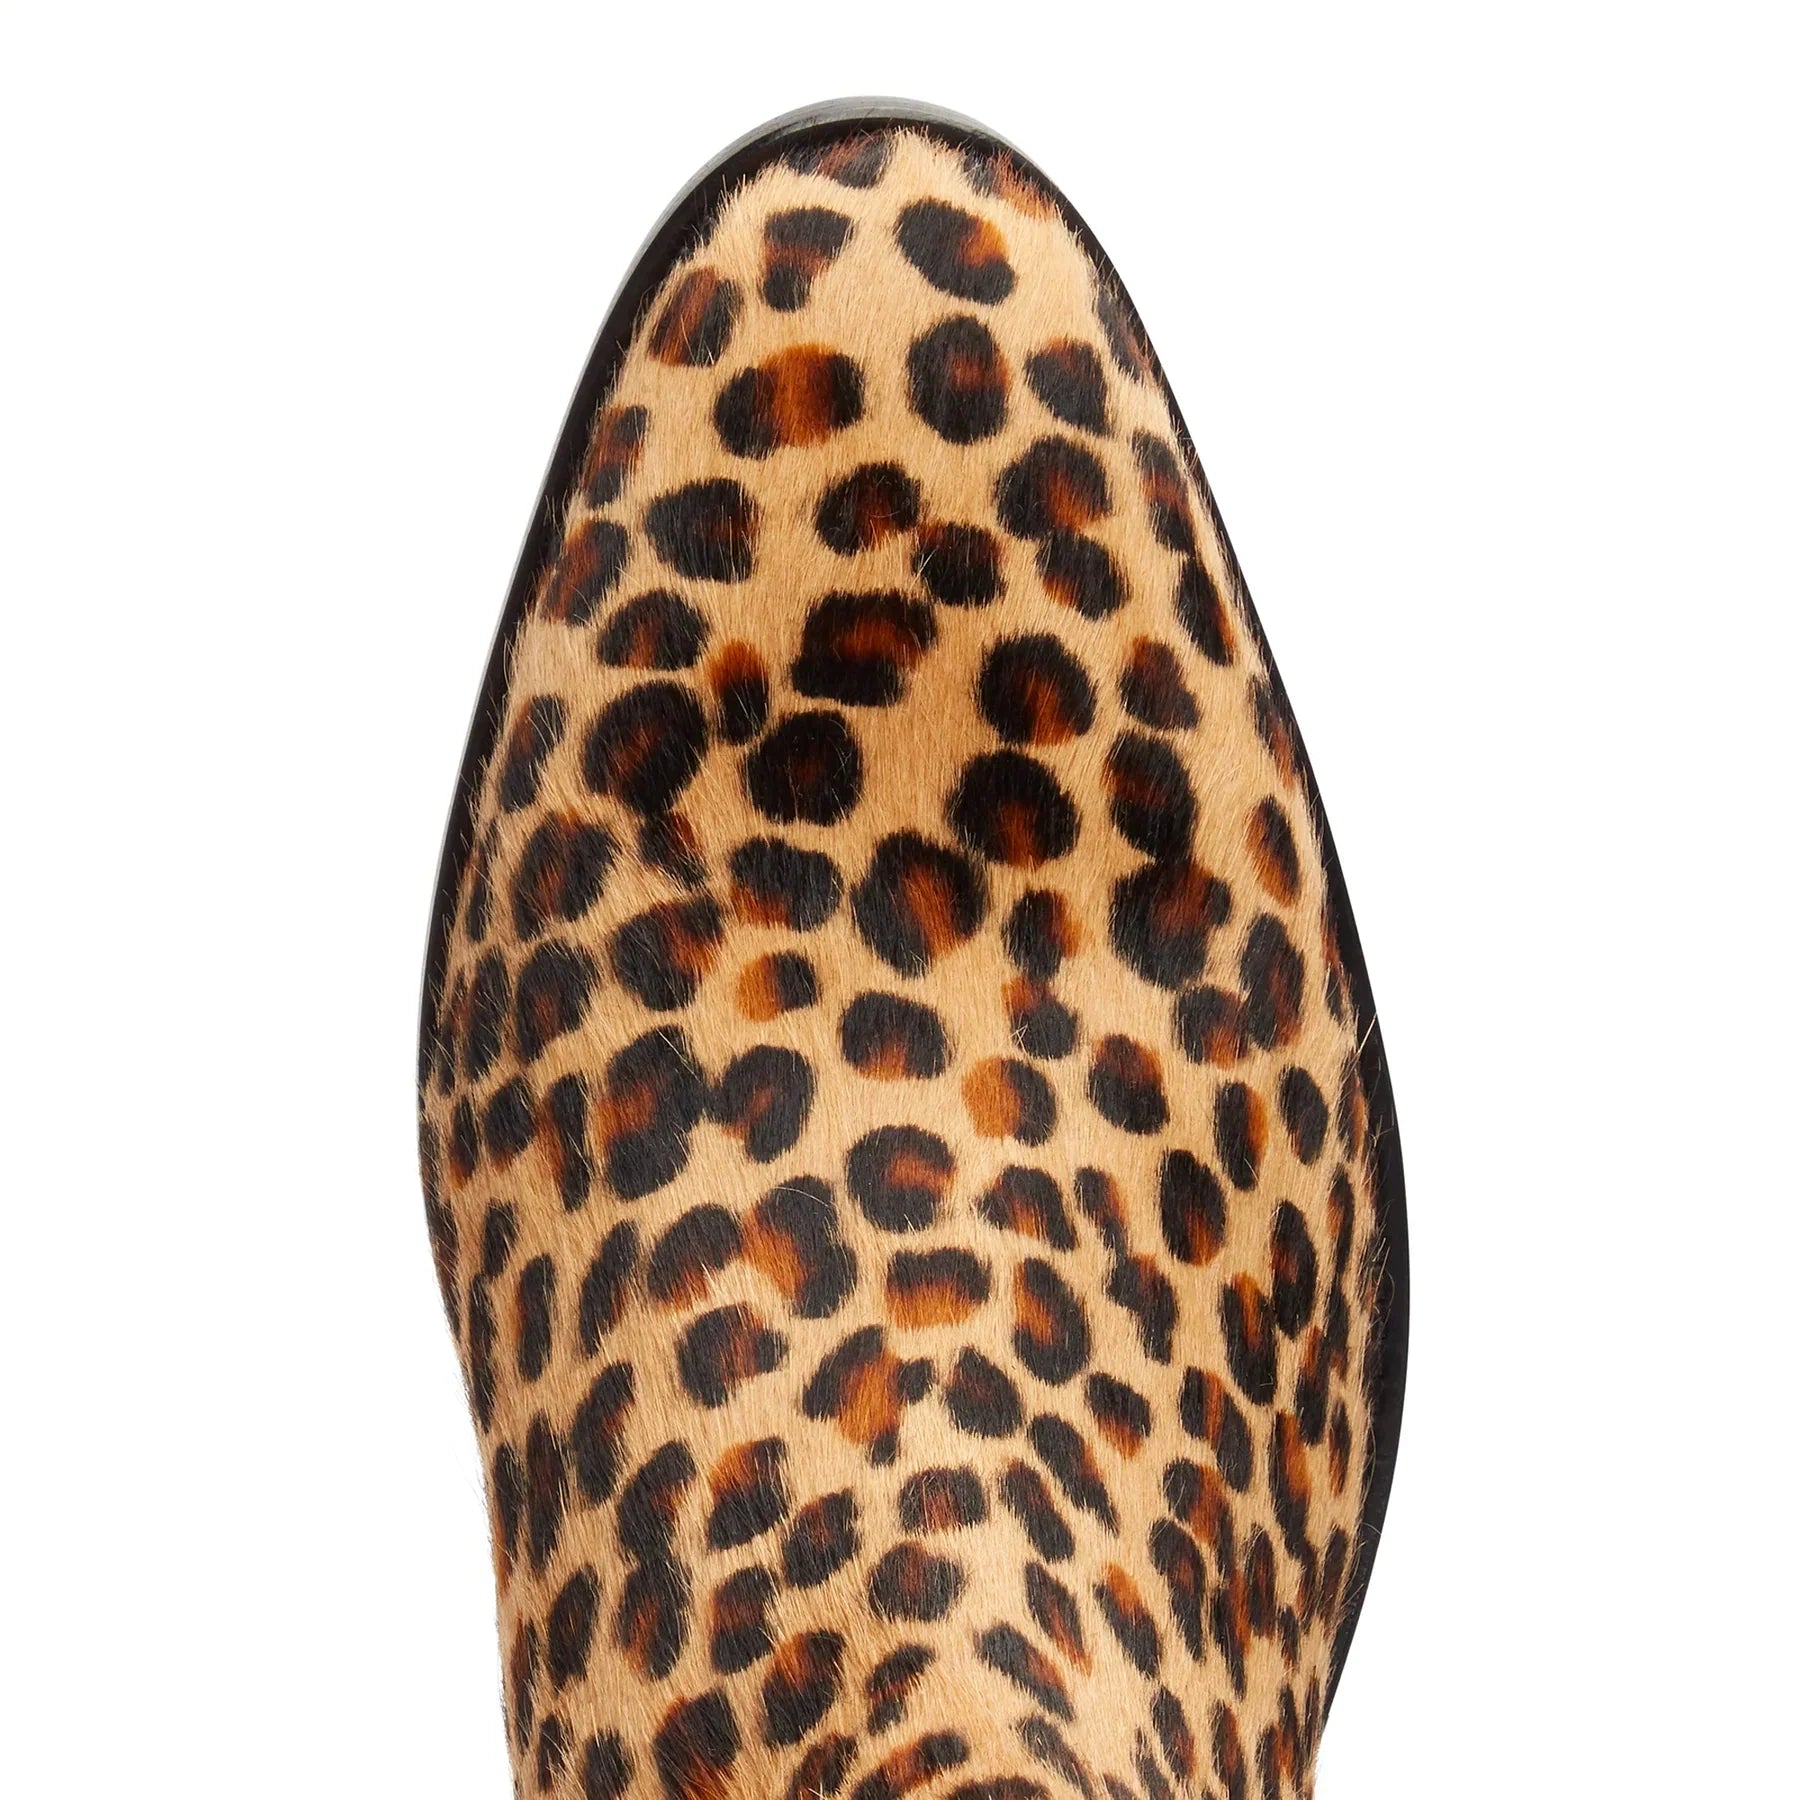 Chelsea Boot - Leopard Print Pony Hair Leather